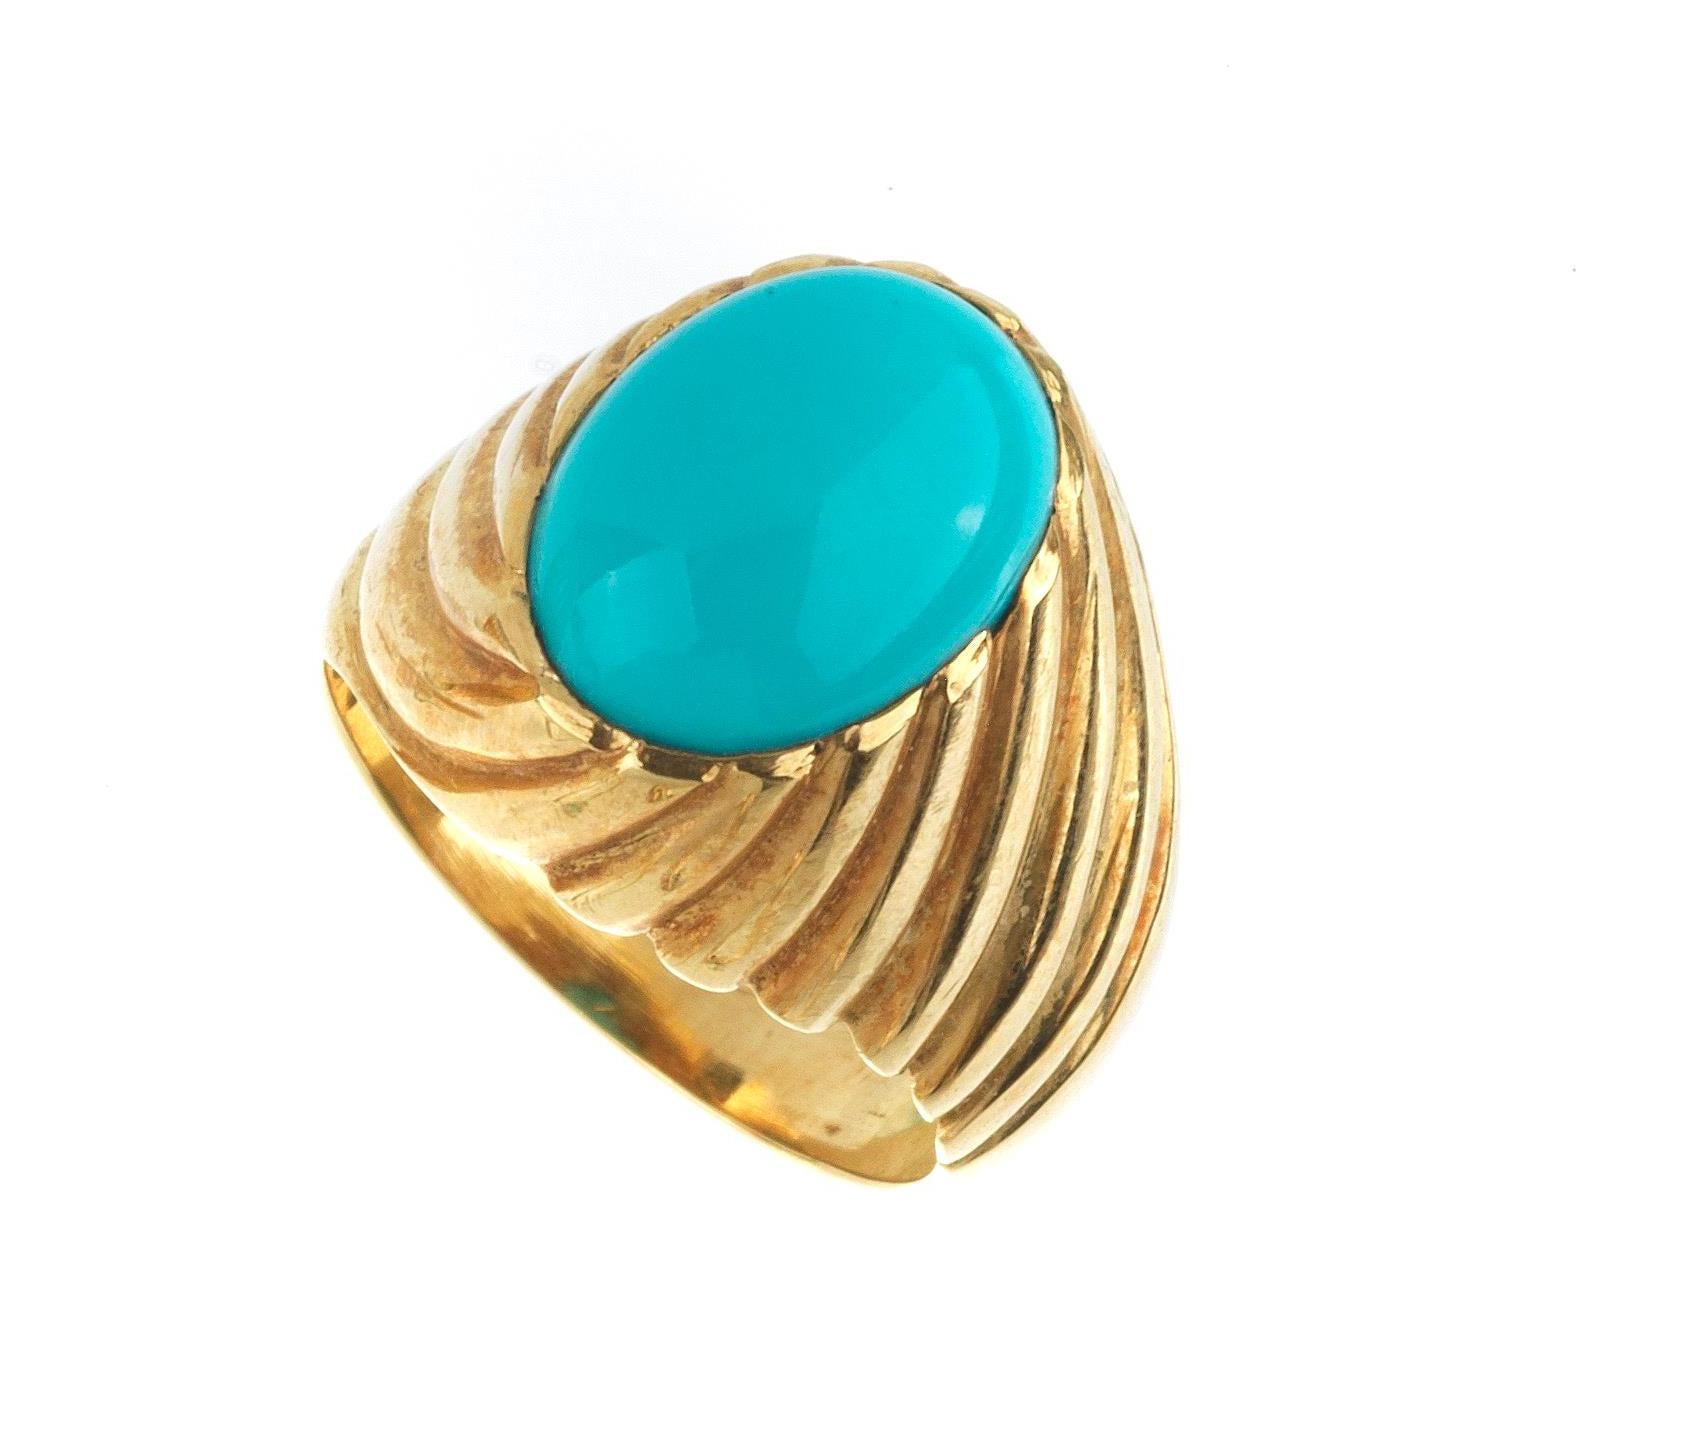 centering an oval-shaped turquoise cabochon, the woven motif mount.
Weight : 11,6gr.
Size : 7 1/4
